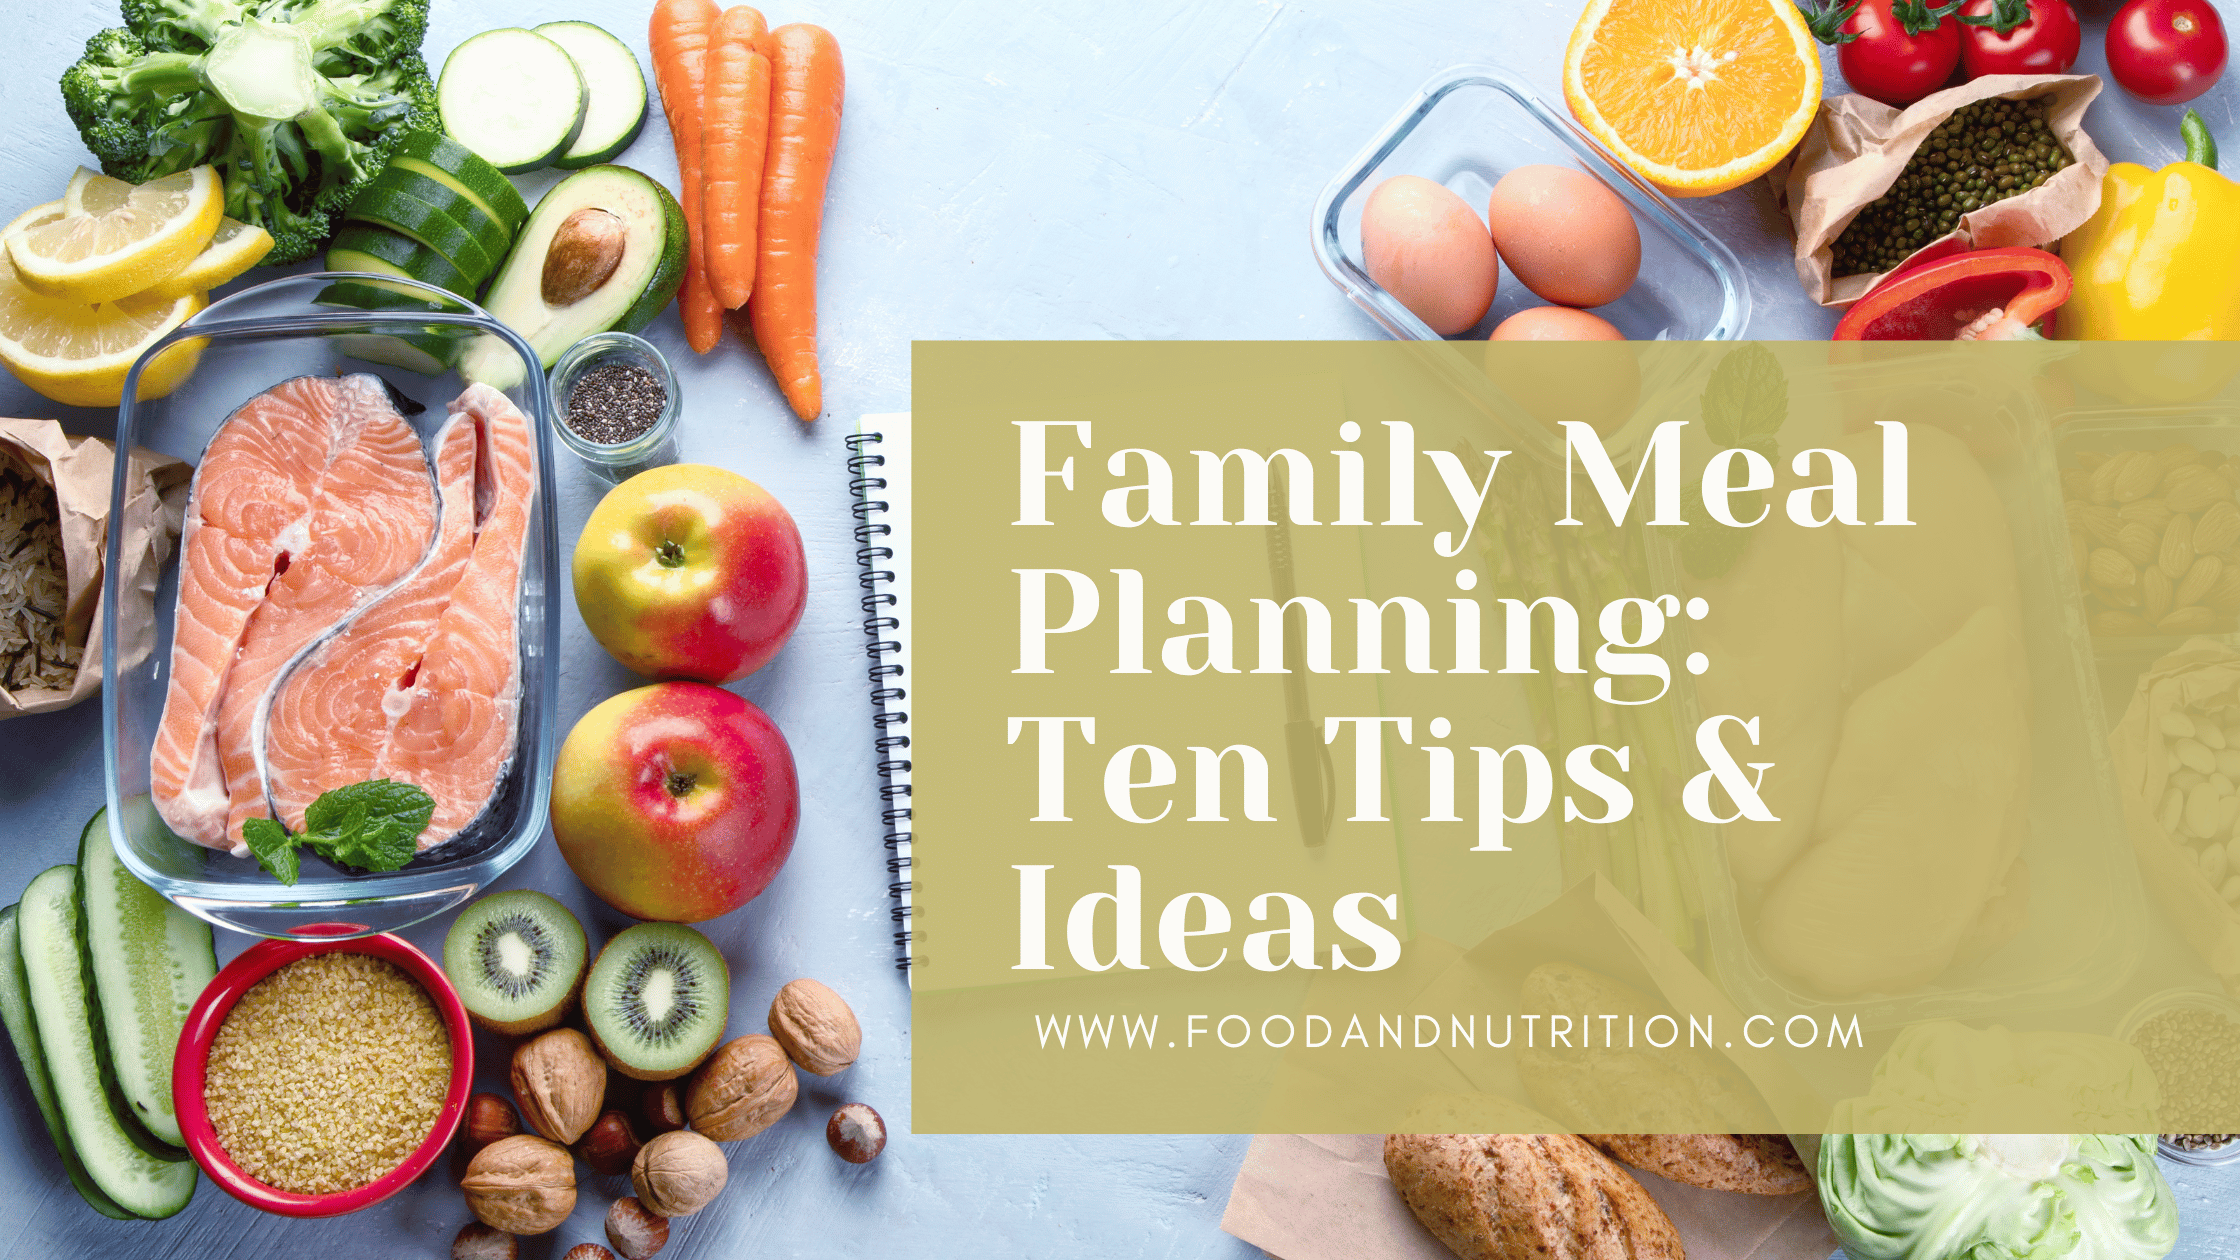 https://foodandnutrition.com/wp-content/uploads/2023/05/Family-Meal-Planning-Ten-Tips-Ideas-03082023.png